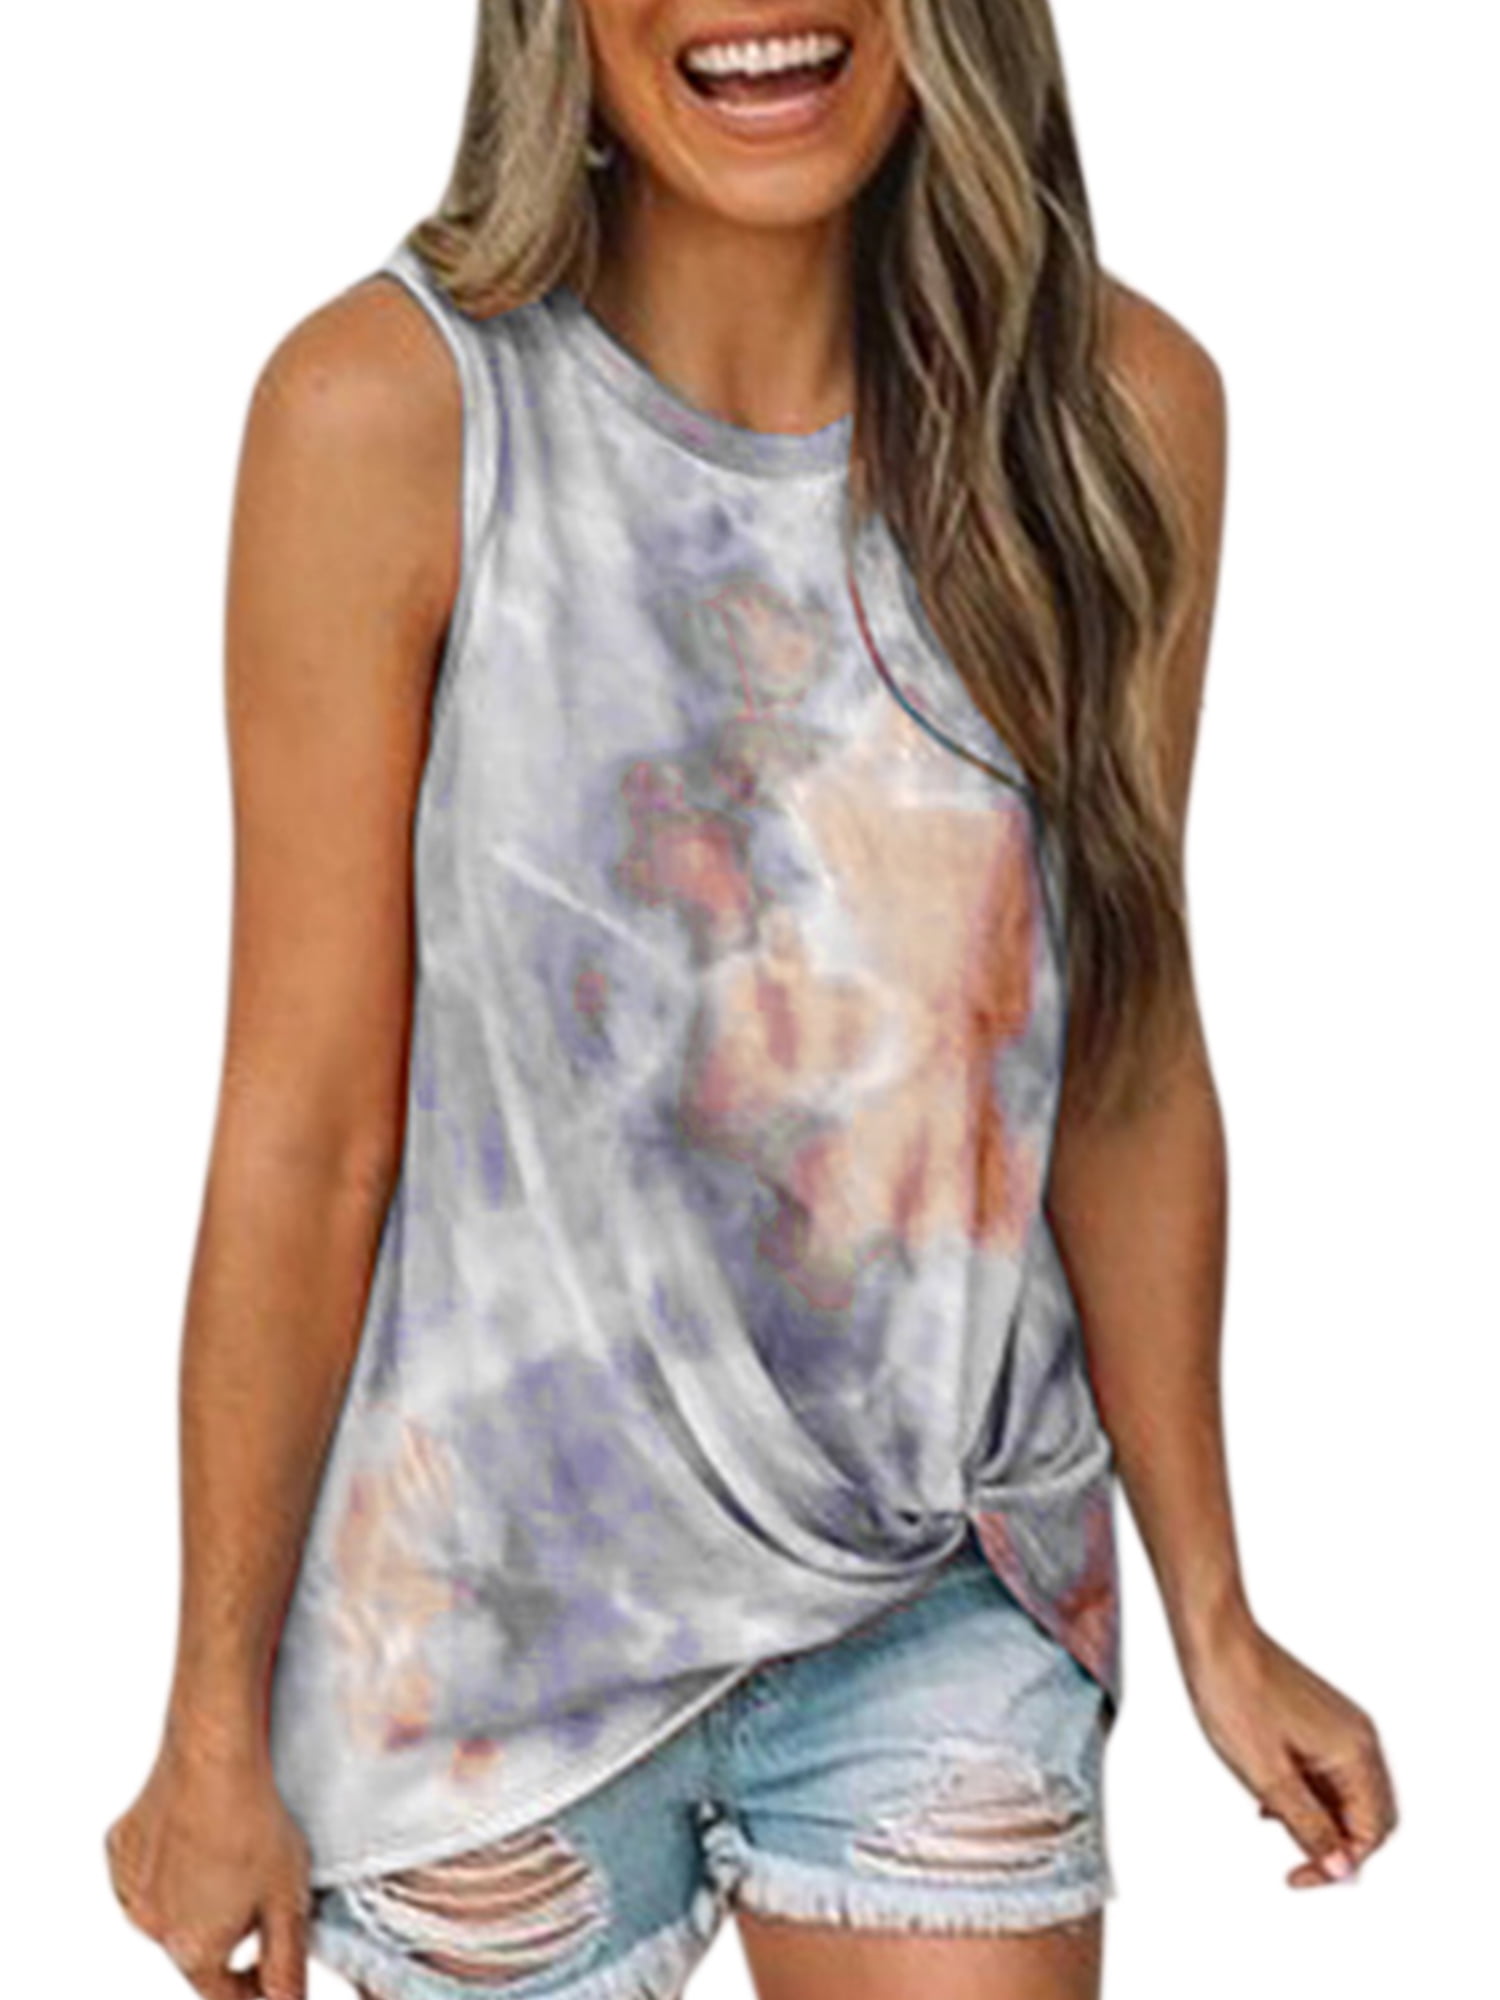 Eytino Women Tie Dye/Floral Printed Twisted Front Strappy Tank Tops Loose Casual Sleeveless Shirts Blouse S-XXL